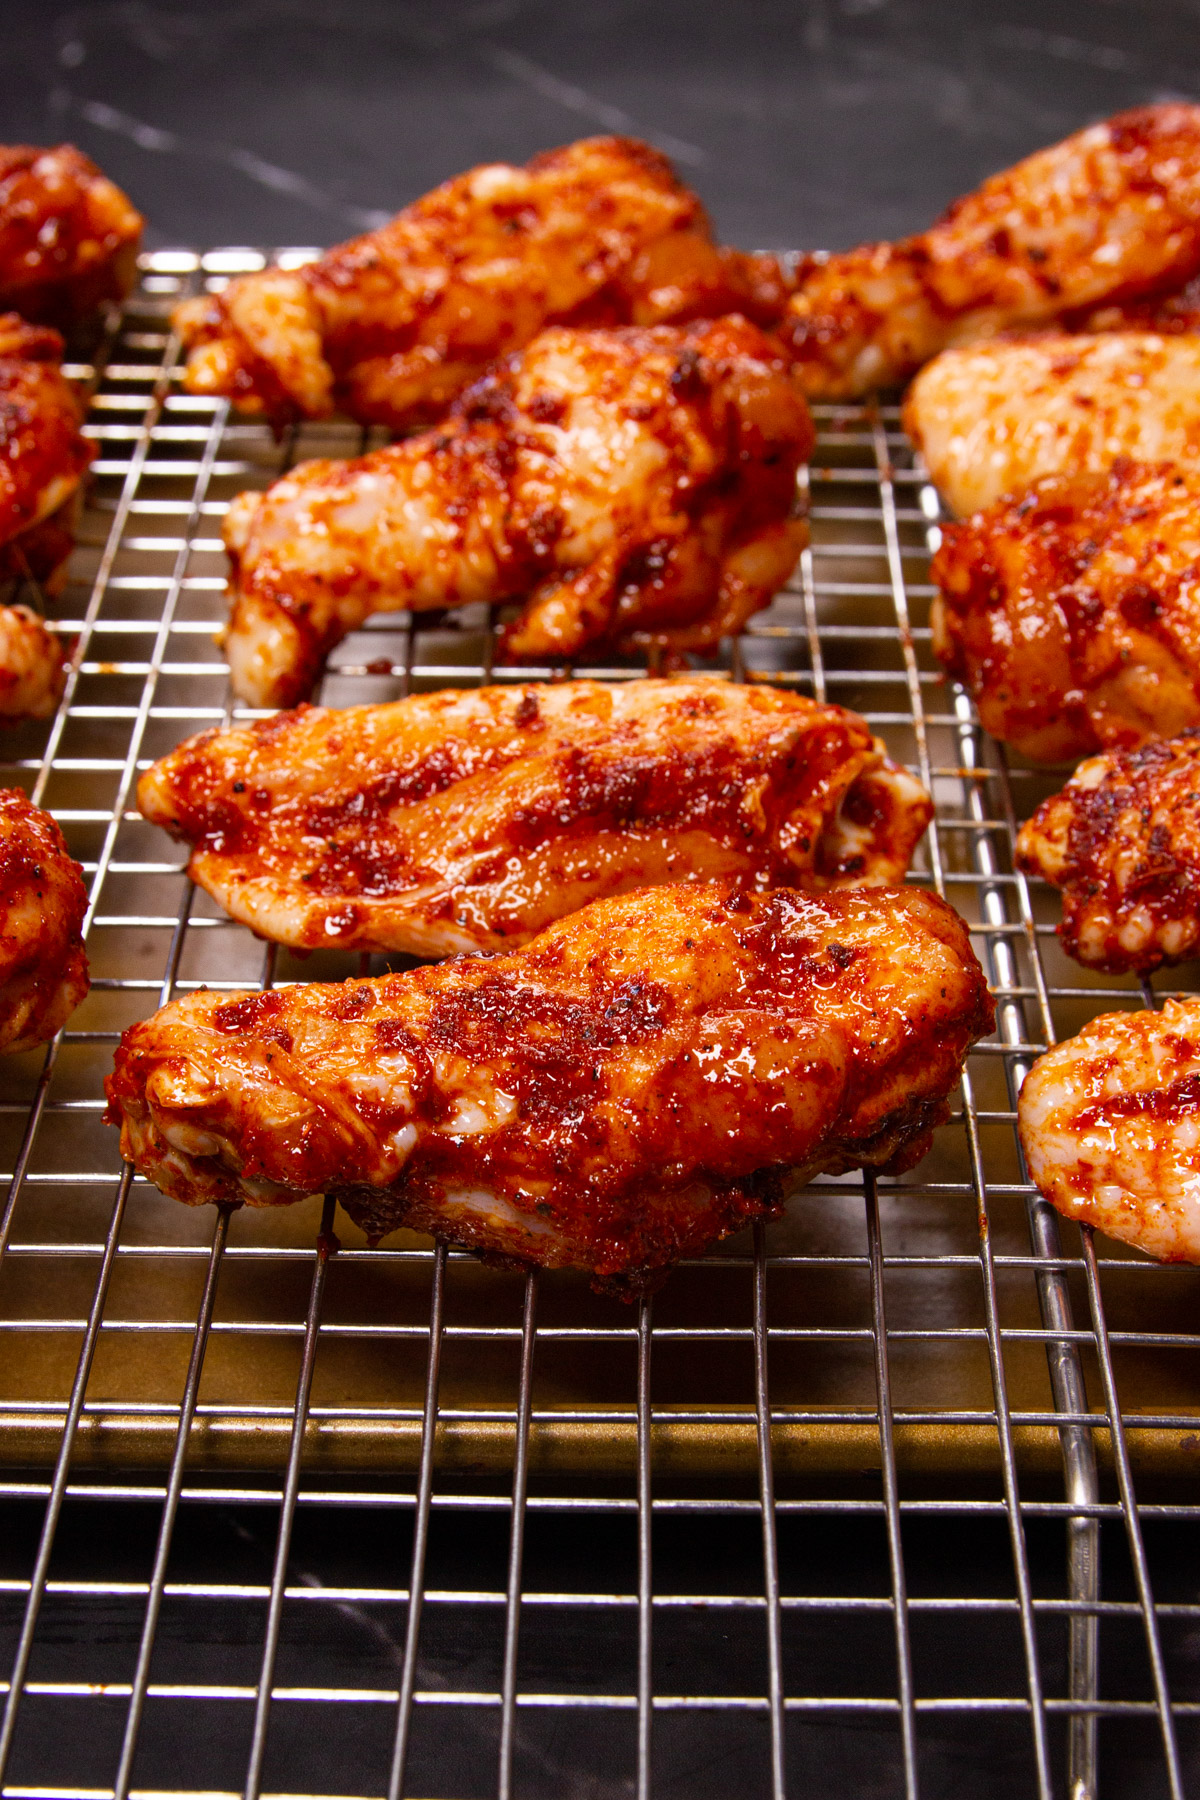 The wings drying on a resting rack with the spice rub.